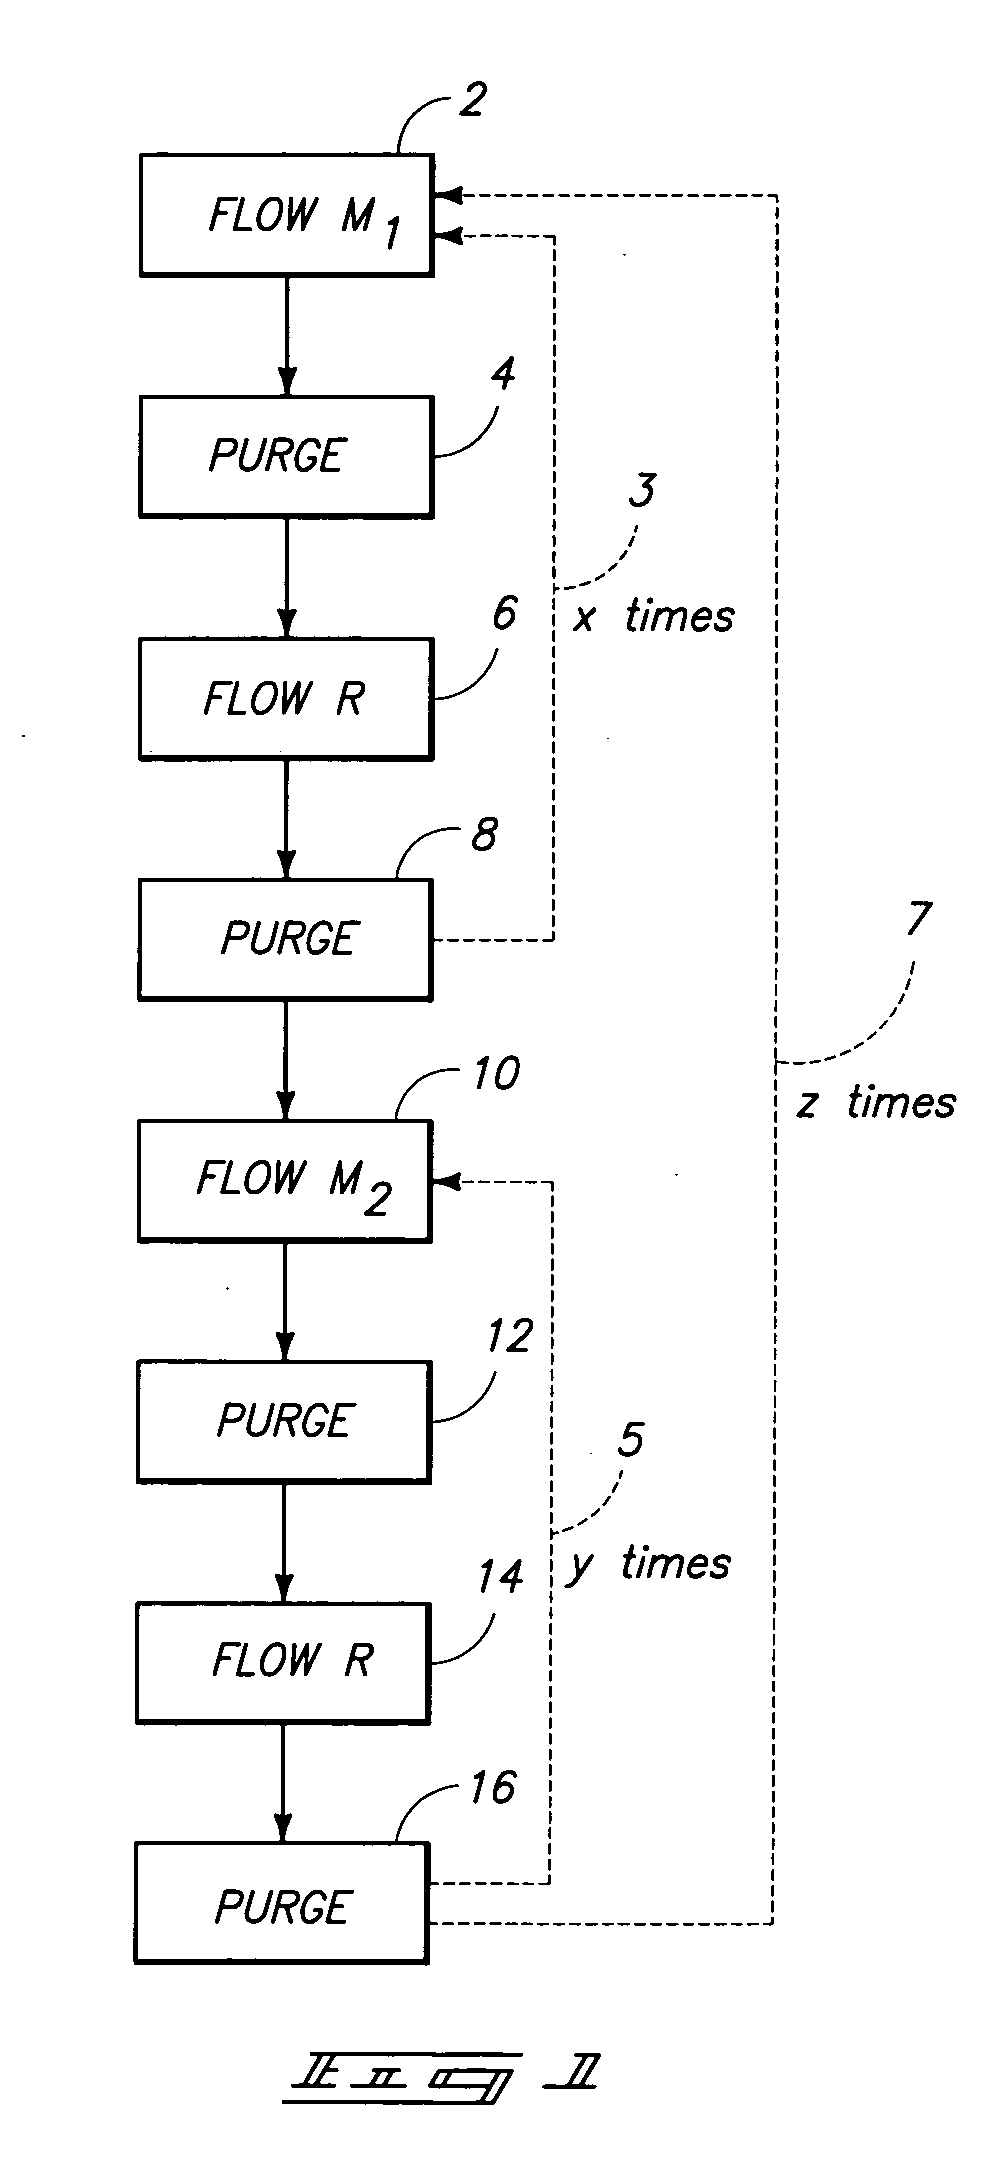 Methods of forming material over substrates